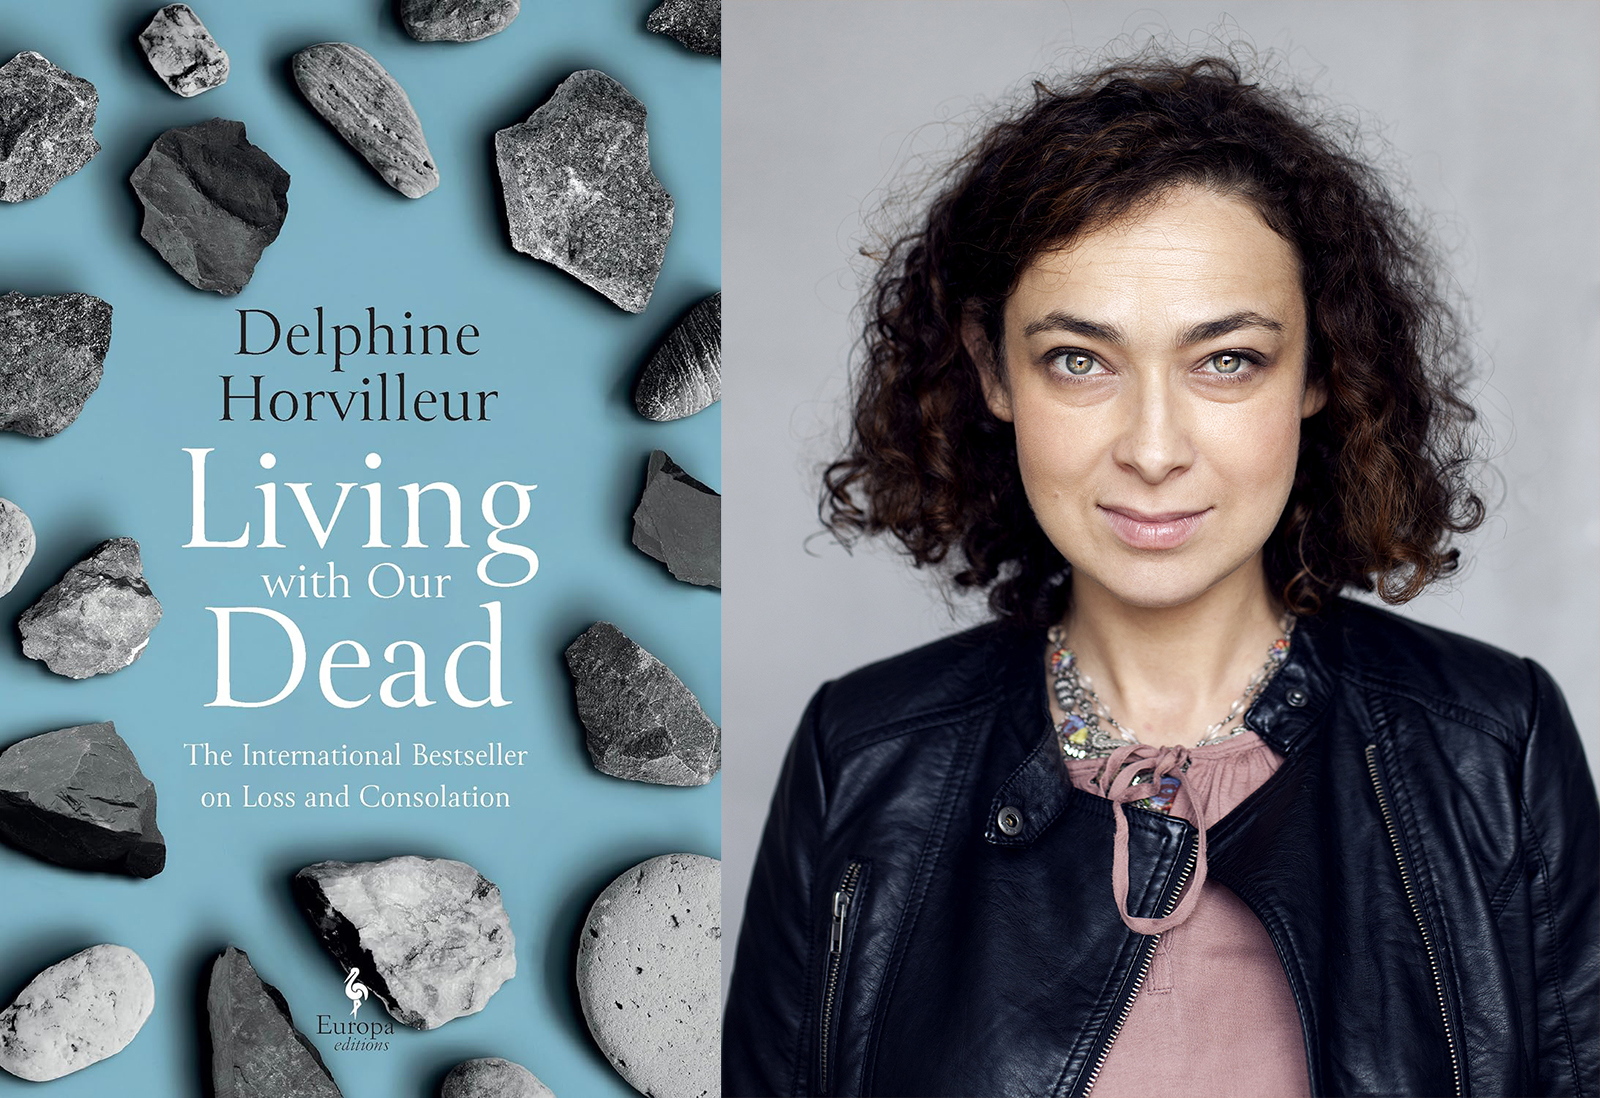 "Living with Our Dead" and author Rabbi Delphine Horvilleur. (Photo by Rudy Waks)